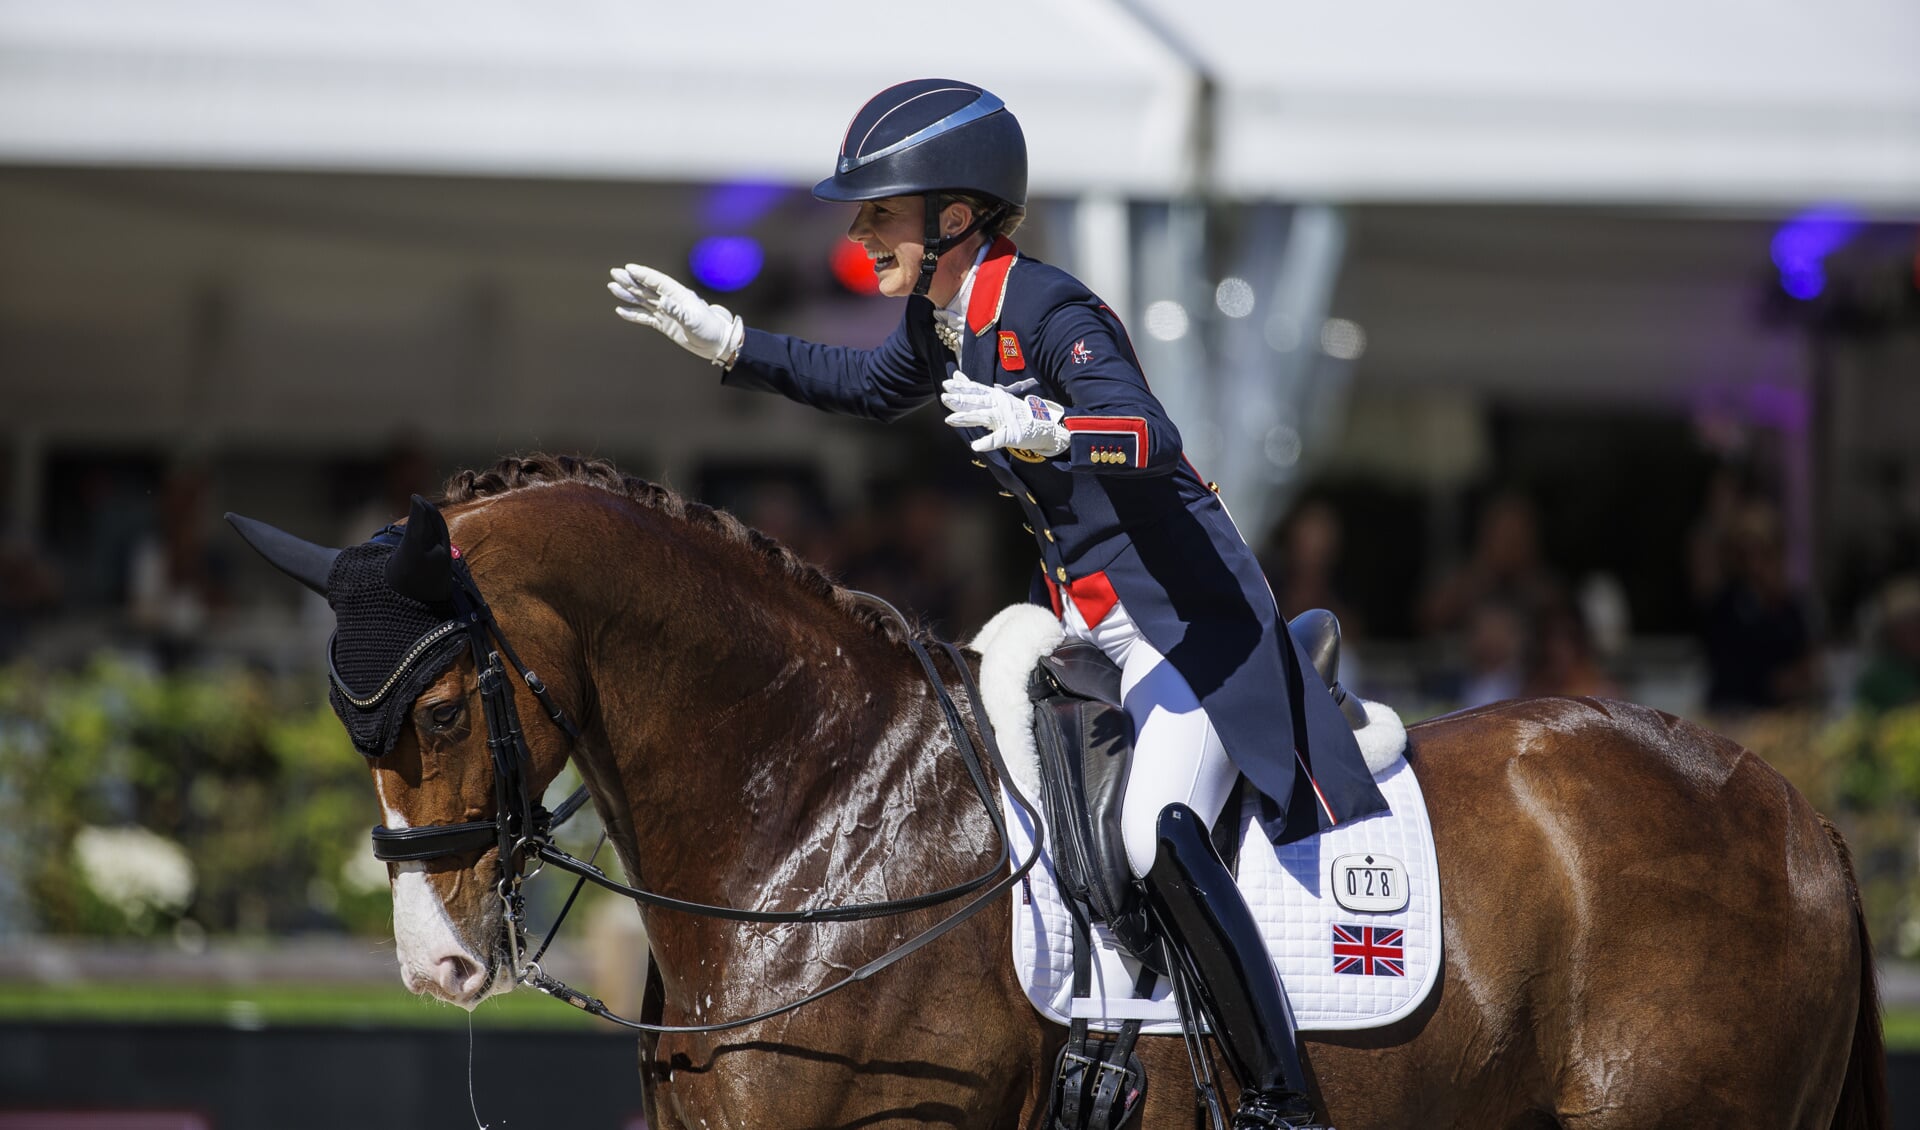 harlotte Dujardin (GBR) riding Imhotep part of the winning team Great Britain in the Grand Prix Dressage ©FEI/Leanjo de Koster